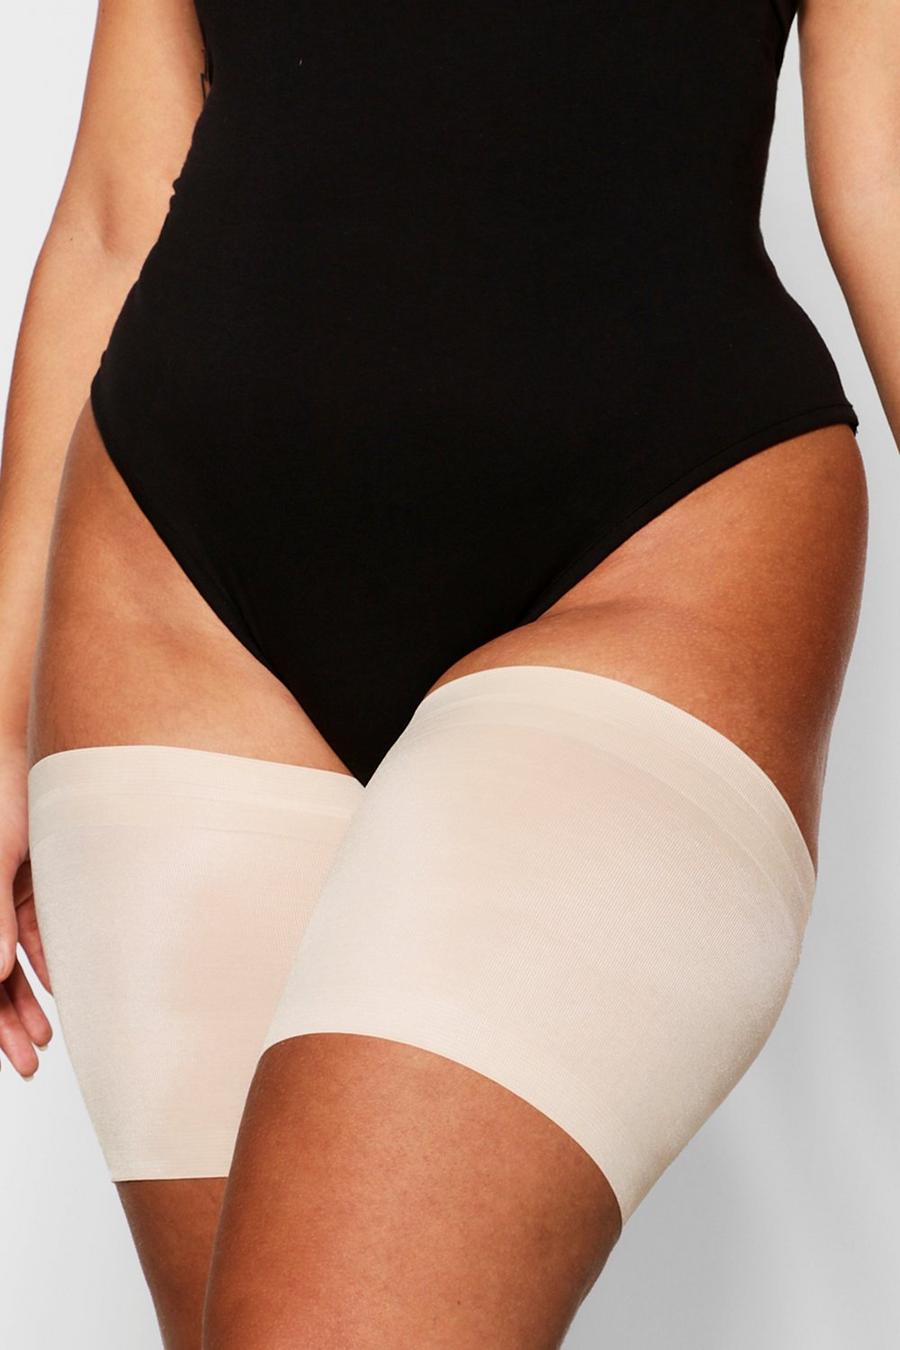 Our Summer Has Been Saved: Pretty Little Thing Now Sells Anti-chafing Bands  Metro News